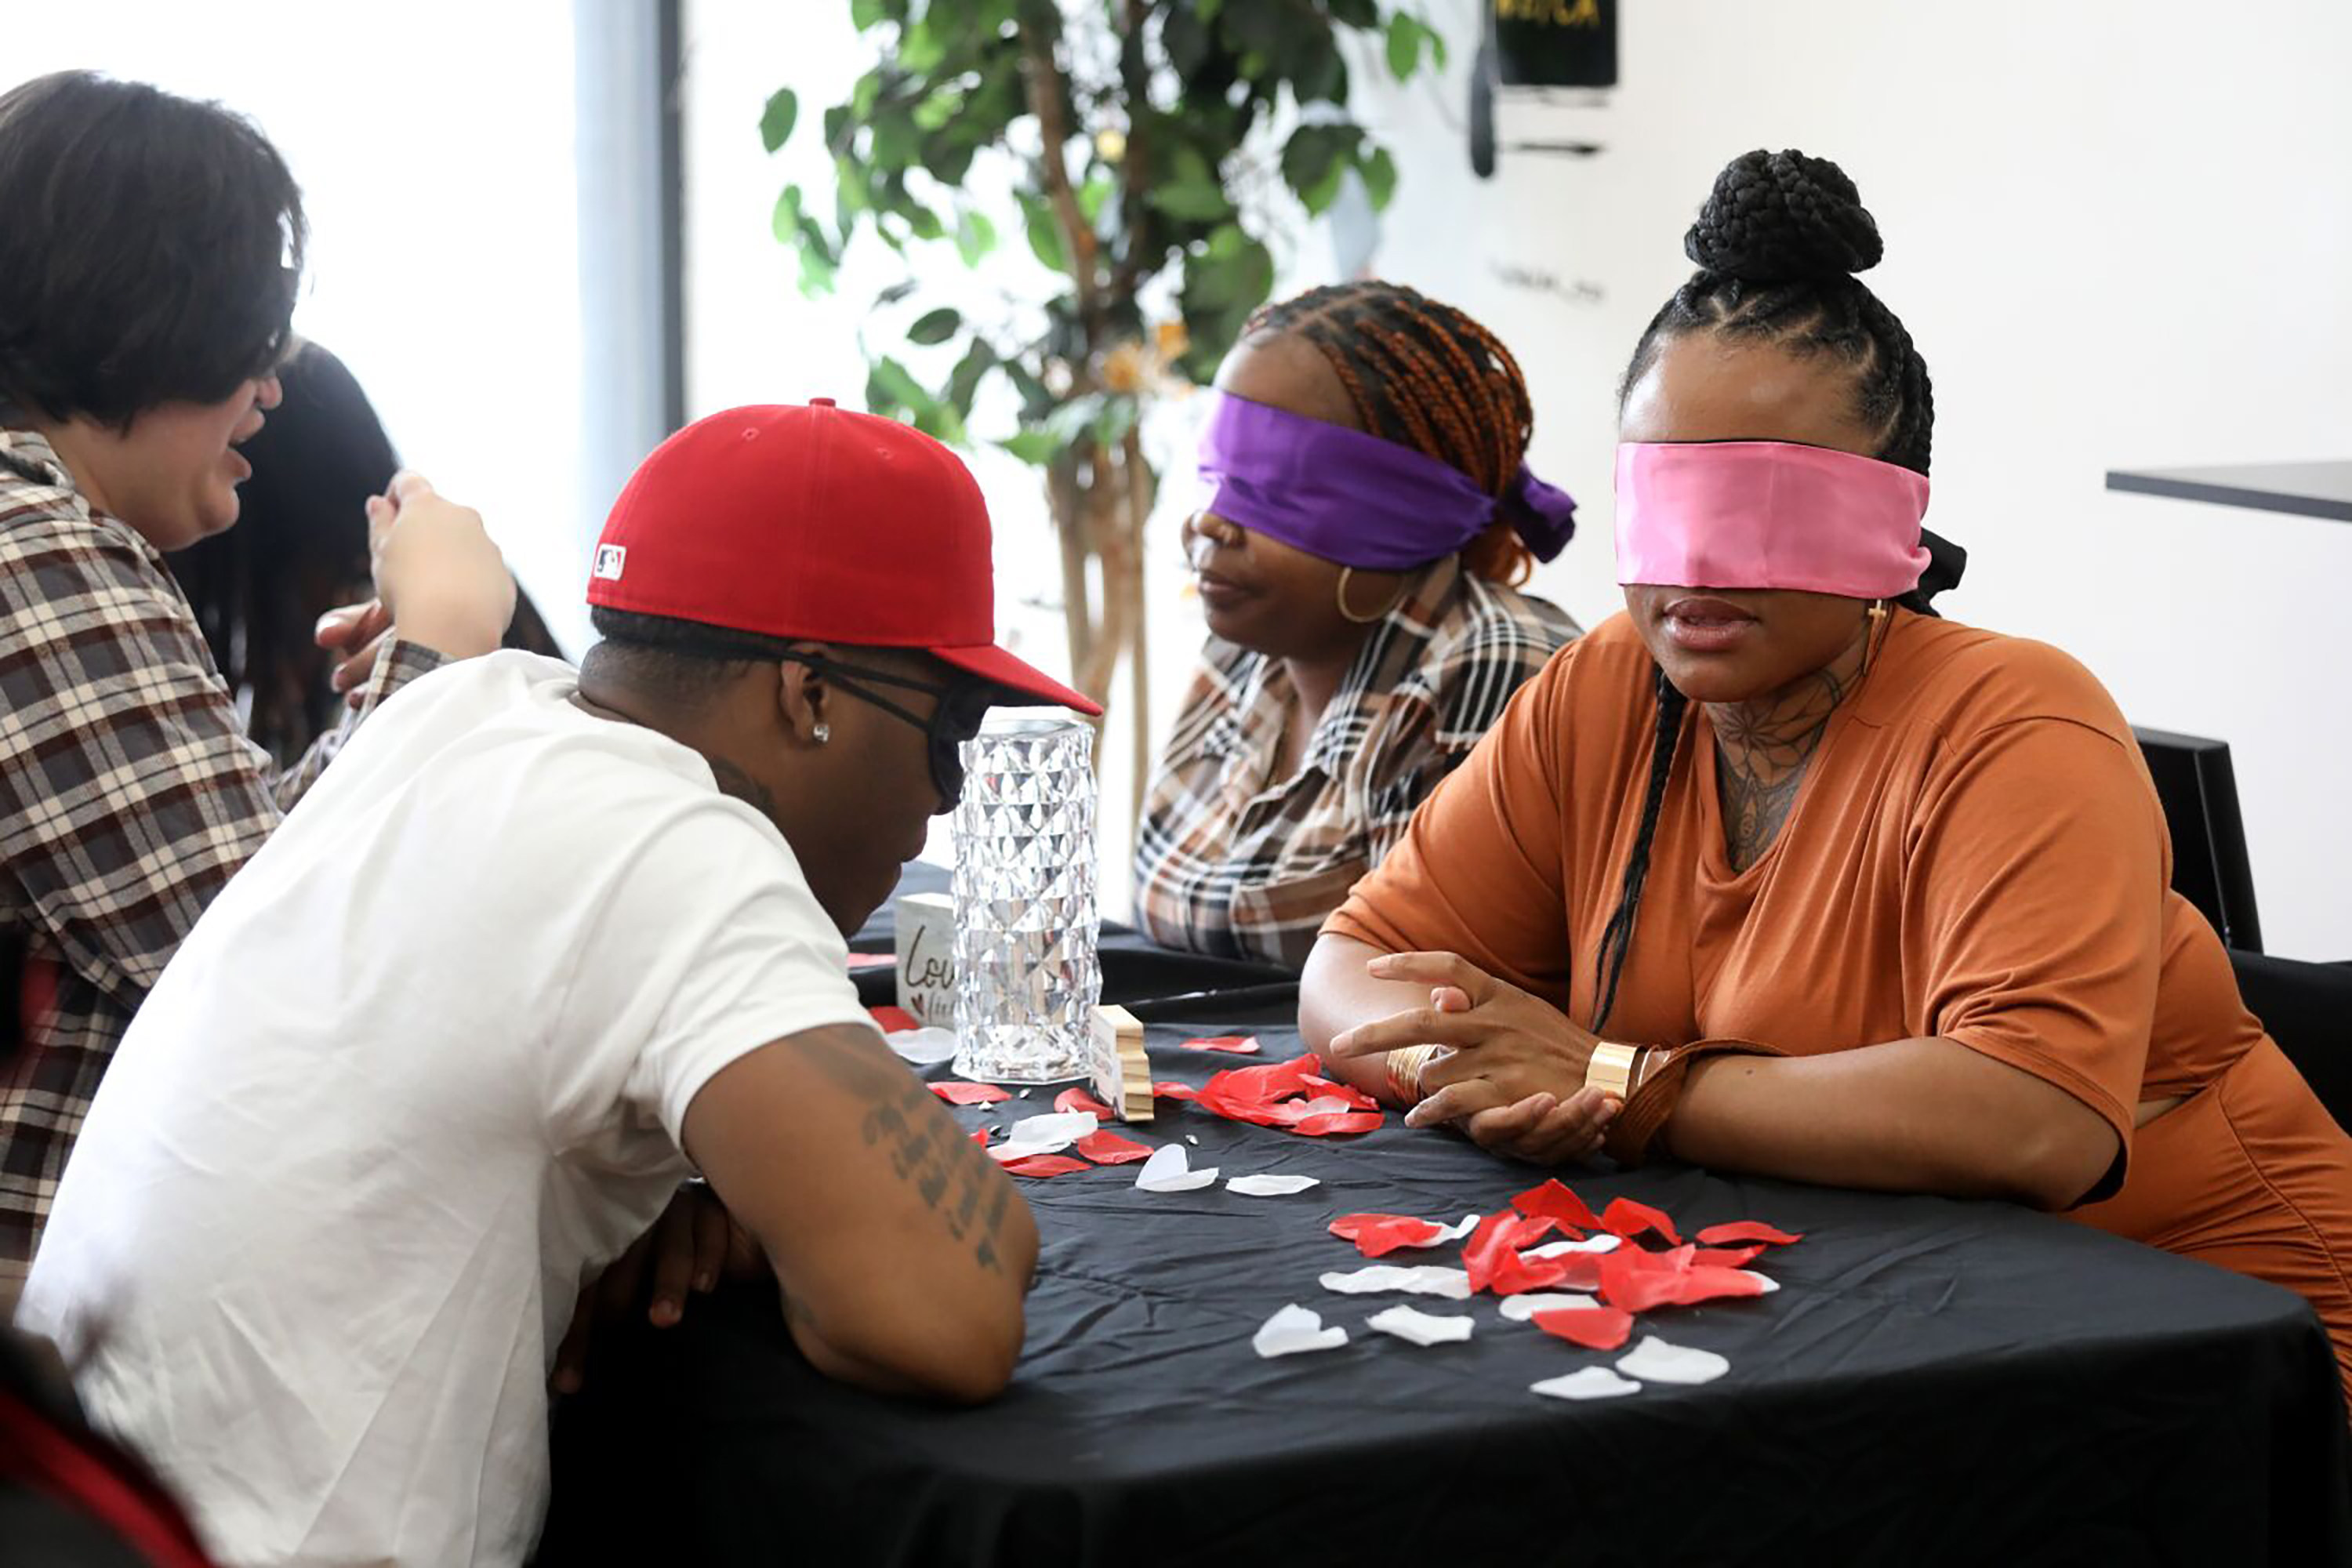 Left to right, Joseph Jessup, of Burbank, music artist Head, of St. Louis, Jessica Holmes, of Compton, and Ashley Franklin, of Anaheim, at a blindfolded speed dating event at the New Millenium Beauty and Barber Shops on Saturday, April 29, 2023, in Los Angeles. Miss Haze began hosting blindfolded speed dating events in her hometown of St. Louis before “Love is Blind” blew up on Netflix. Now, she’s bringing the experience to L.A. for the first time. (Gary Coronado/Los Angeles Times/TNS)